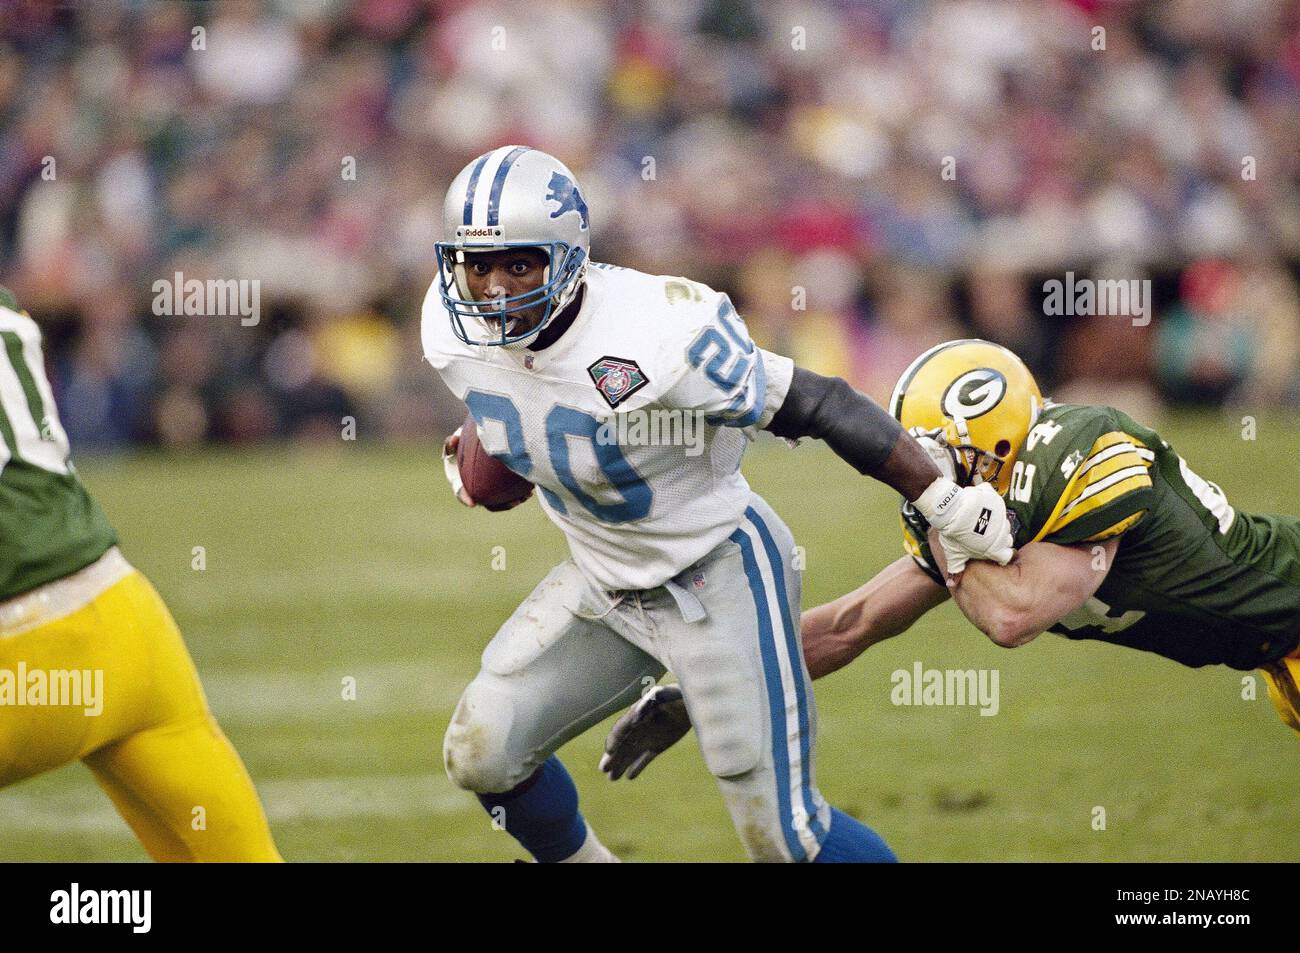 Detroit Lions' Barry Sanders evades a tackle by Green Bay Packers